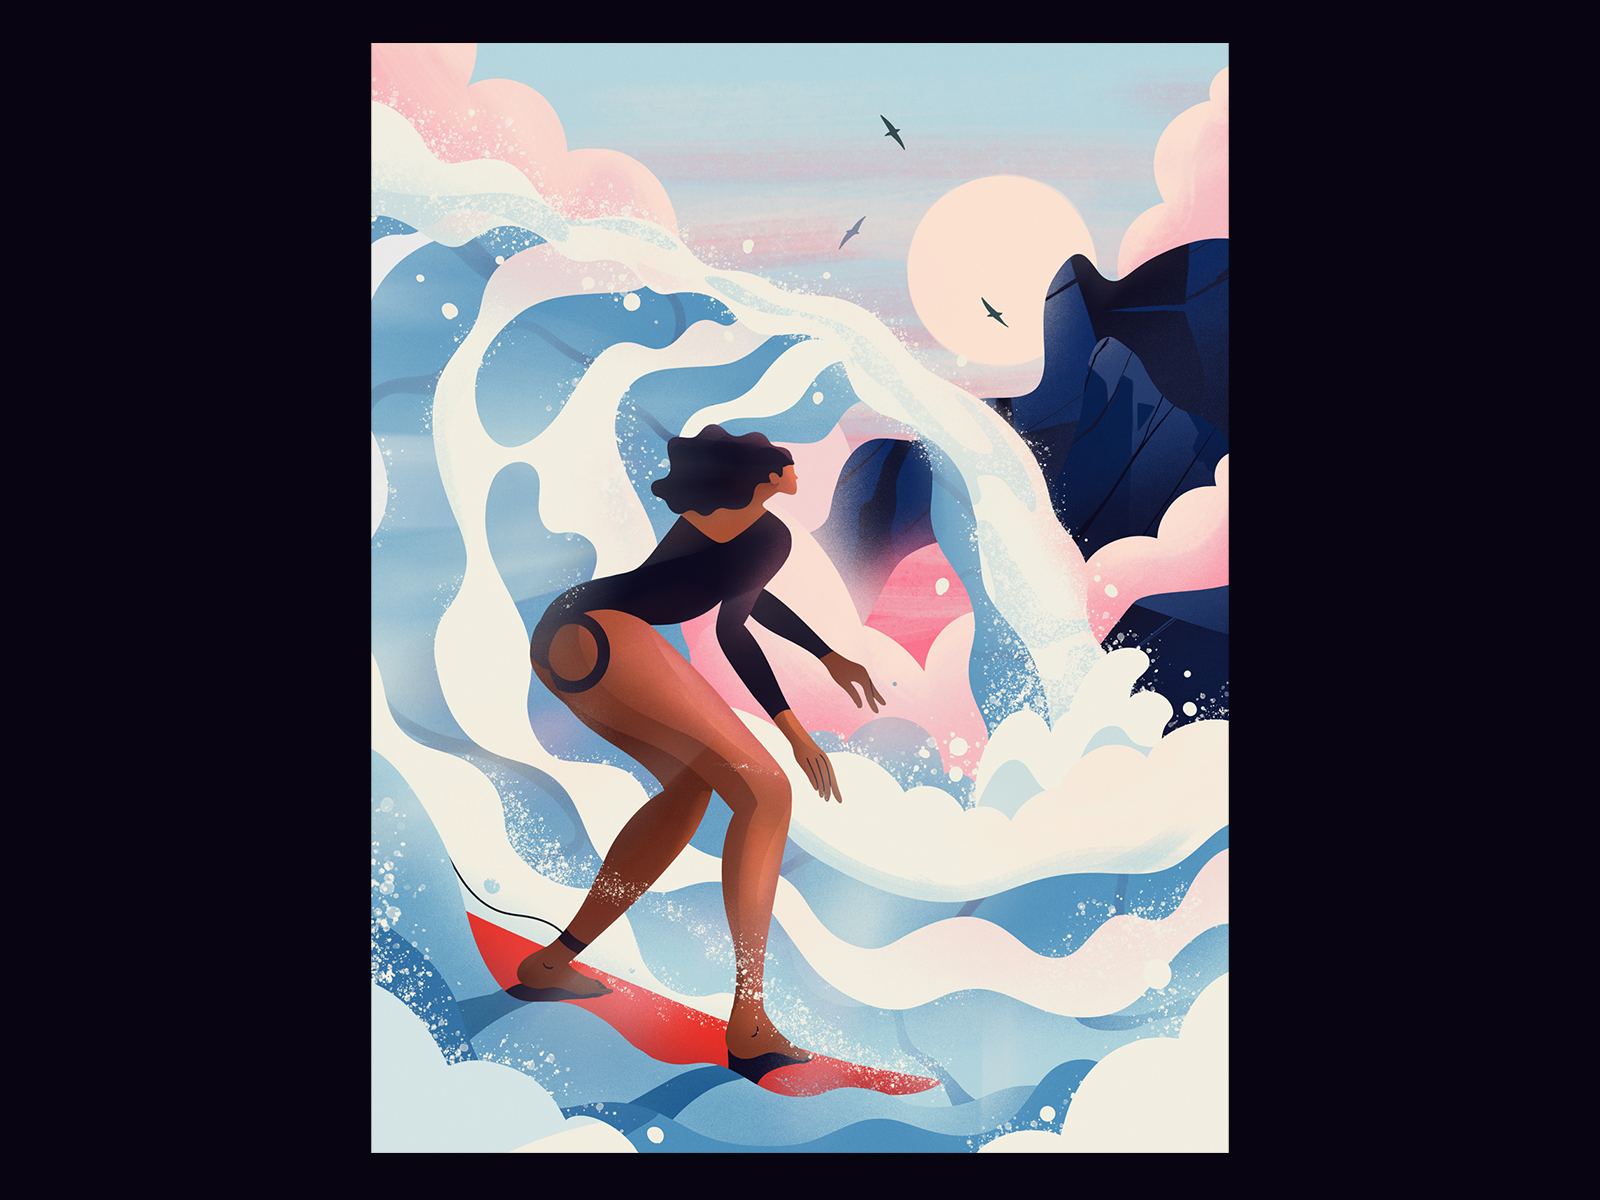 Catching waves 🤙 birds clouds girl illustration ocean sunset surfing waves